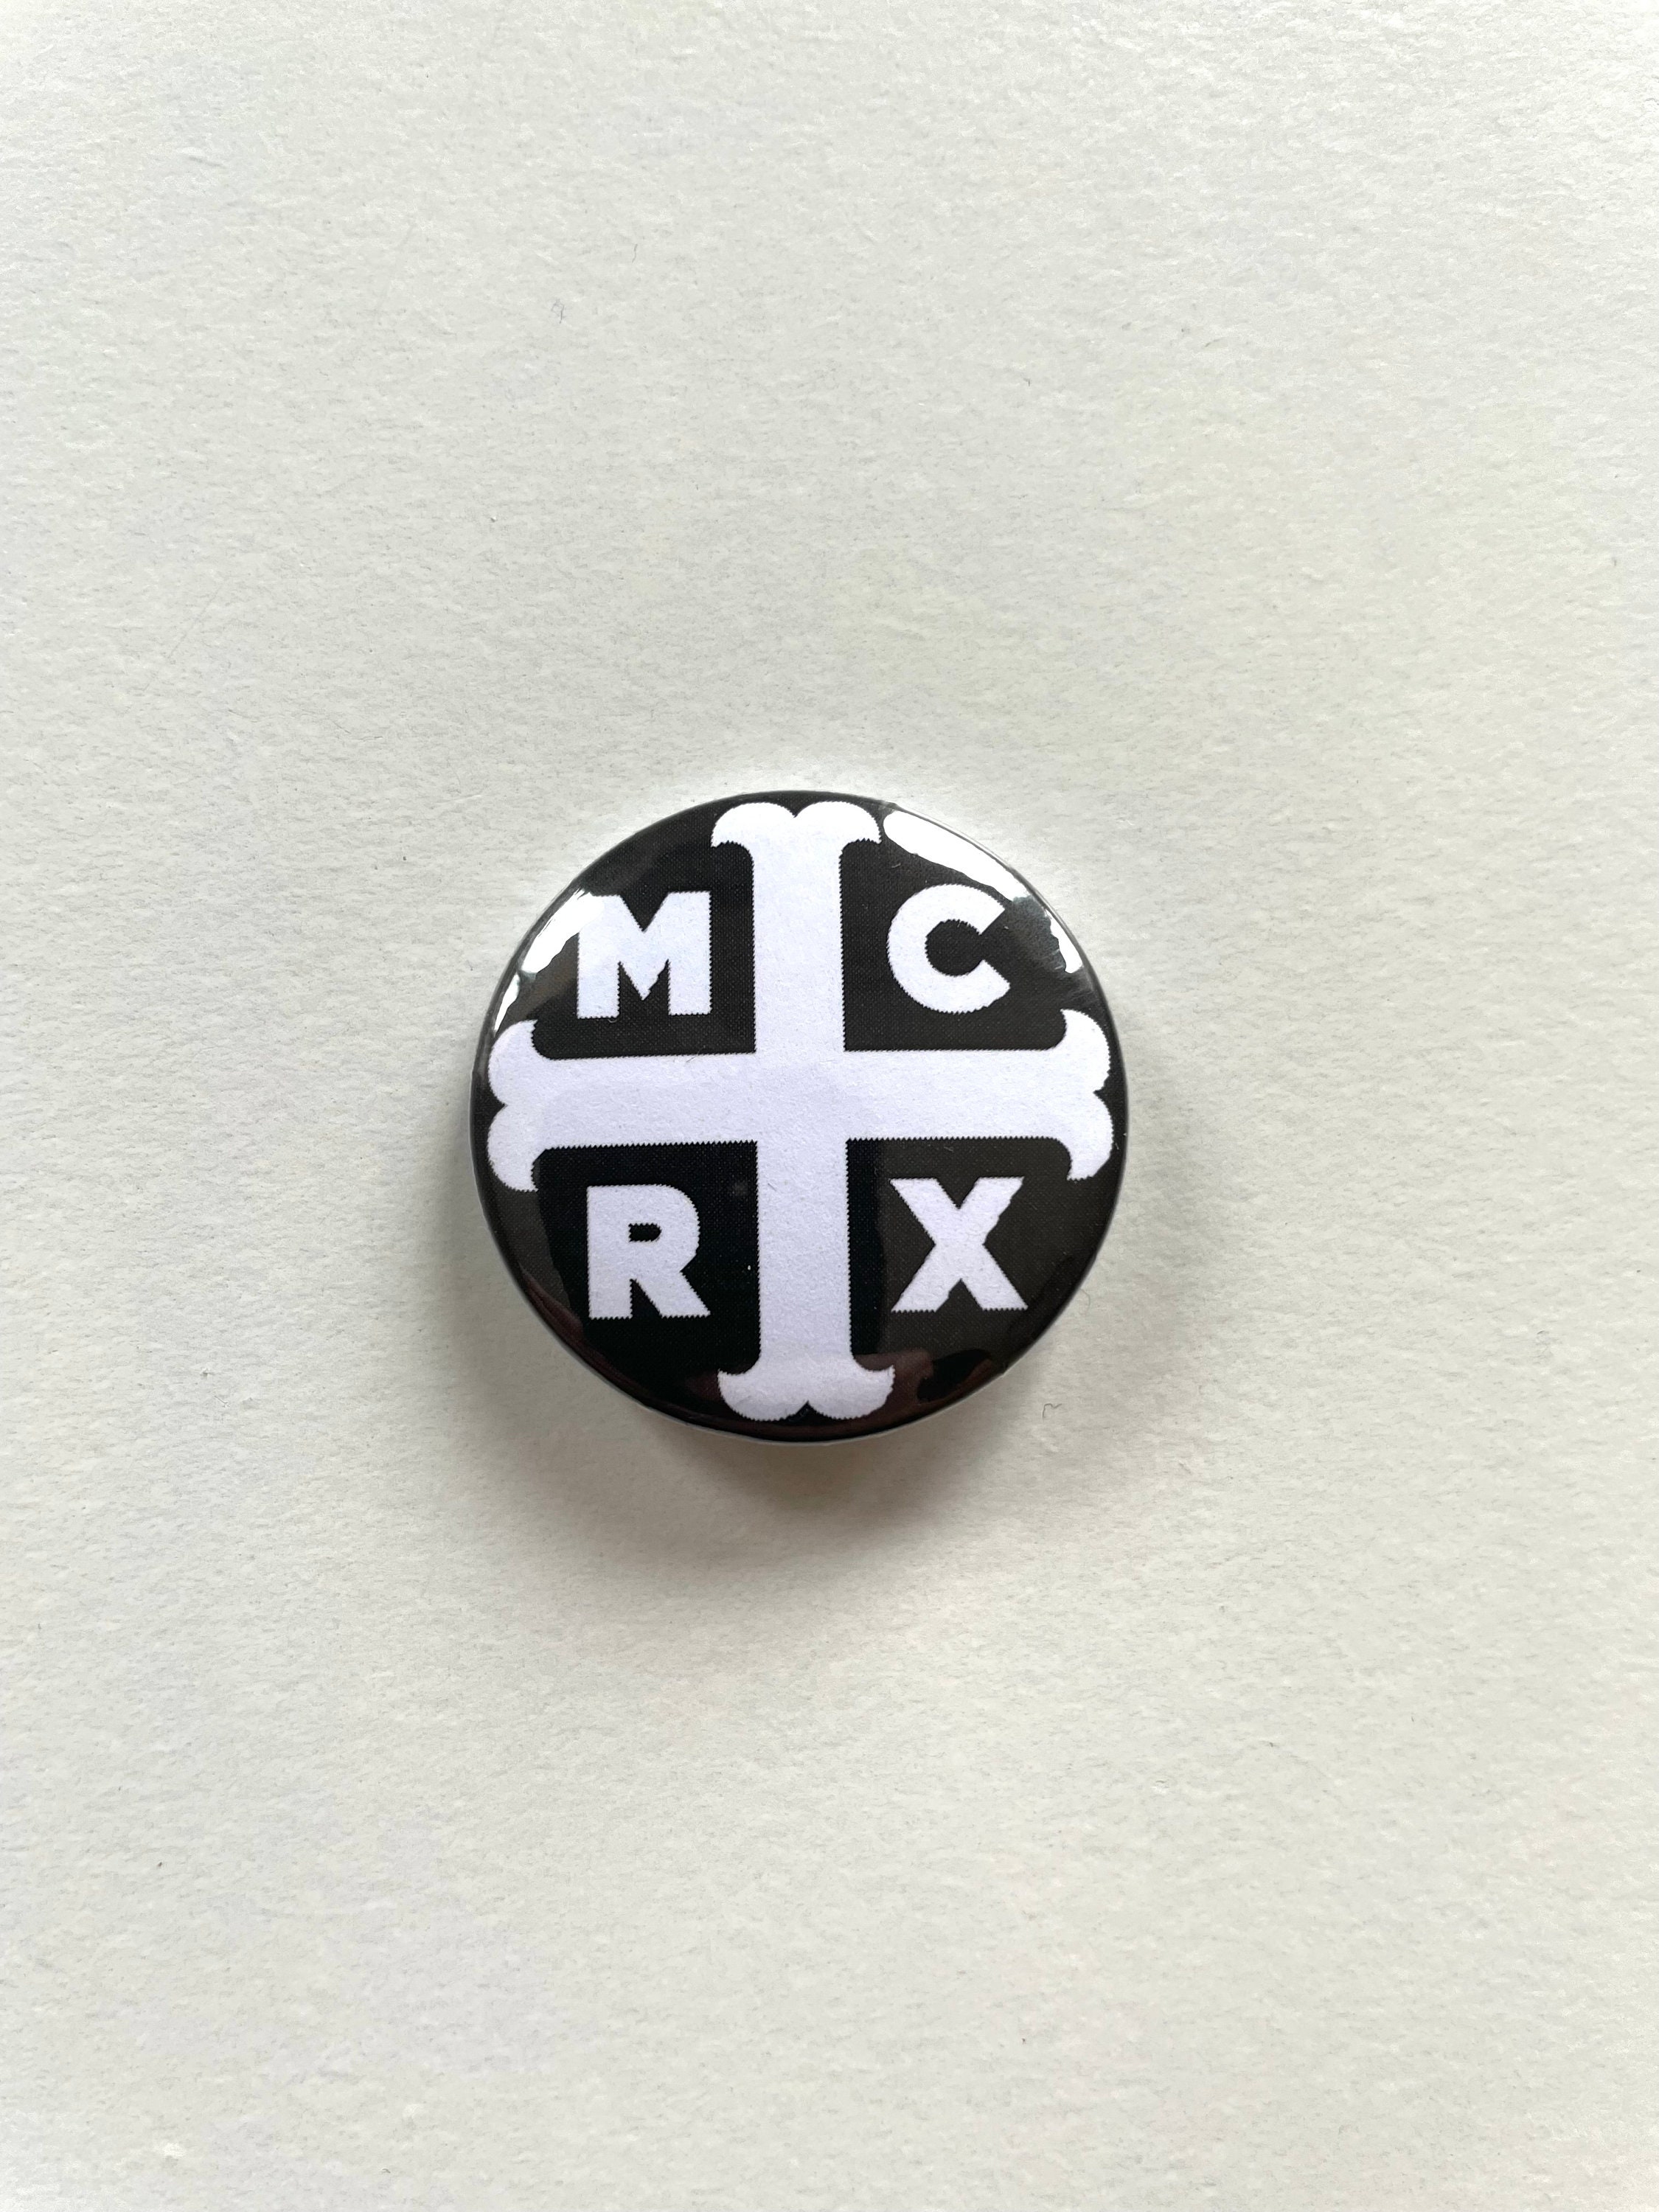 EMO KID Pins Pinback Button Poser and Proud Scene Punk Mall Goth Badge Hot  Topic Nostalgia My Chemical Romance MCR 